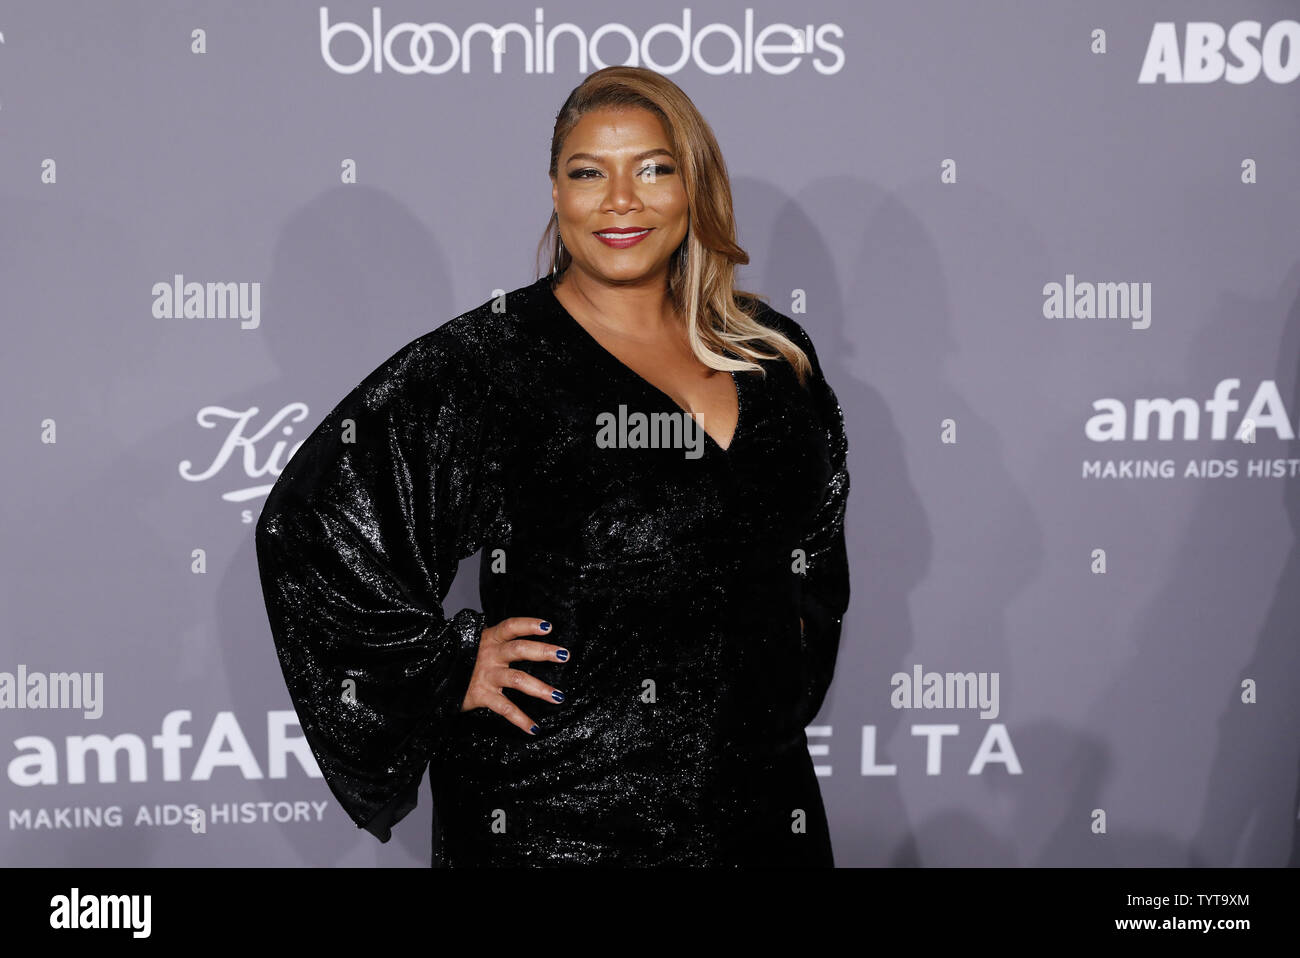 Queen Latifah arrives on the red carpet at the 2018 amfAR Gala New York at Cipriani Wall Street on February 7, 2018 in New York City.       Photo by John Angelillo/UPI Stock Photo